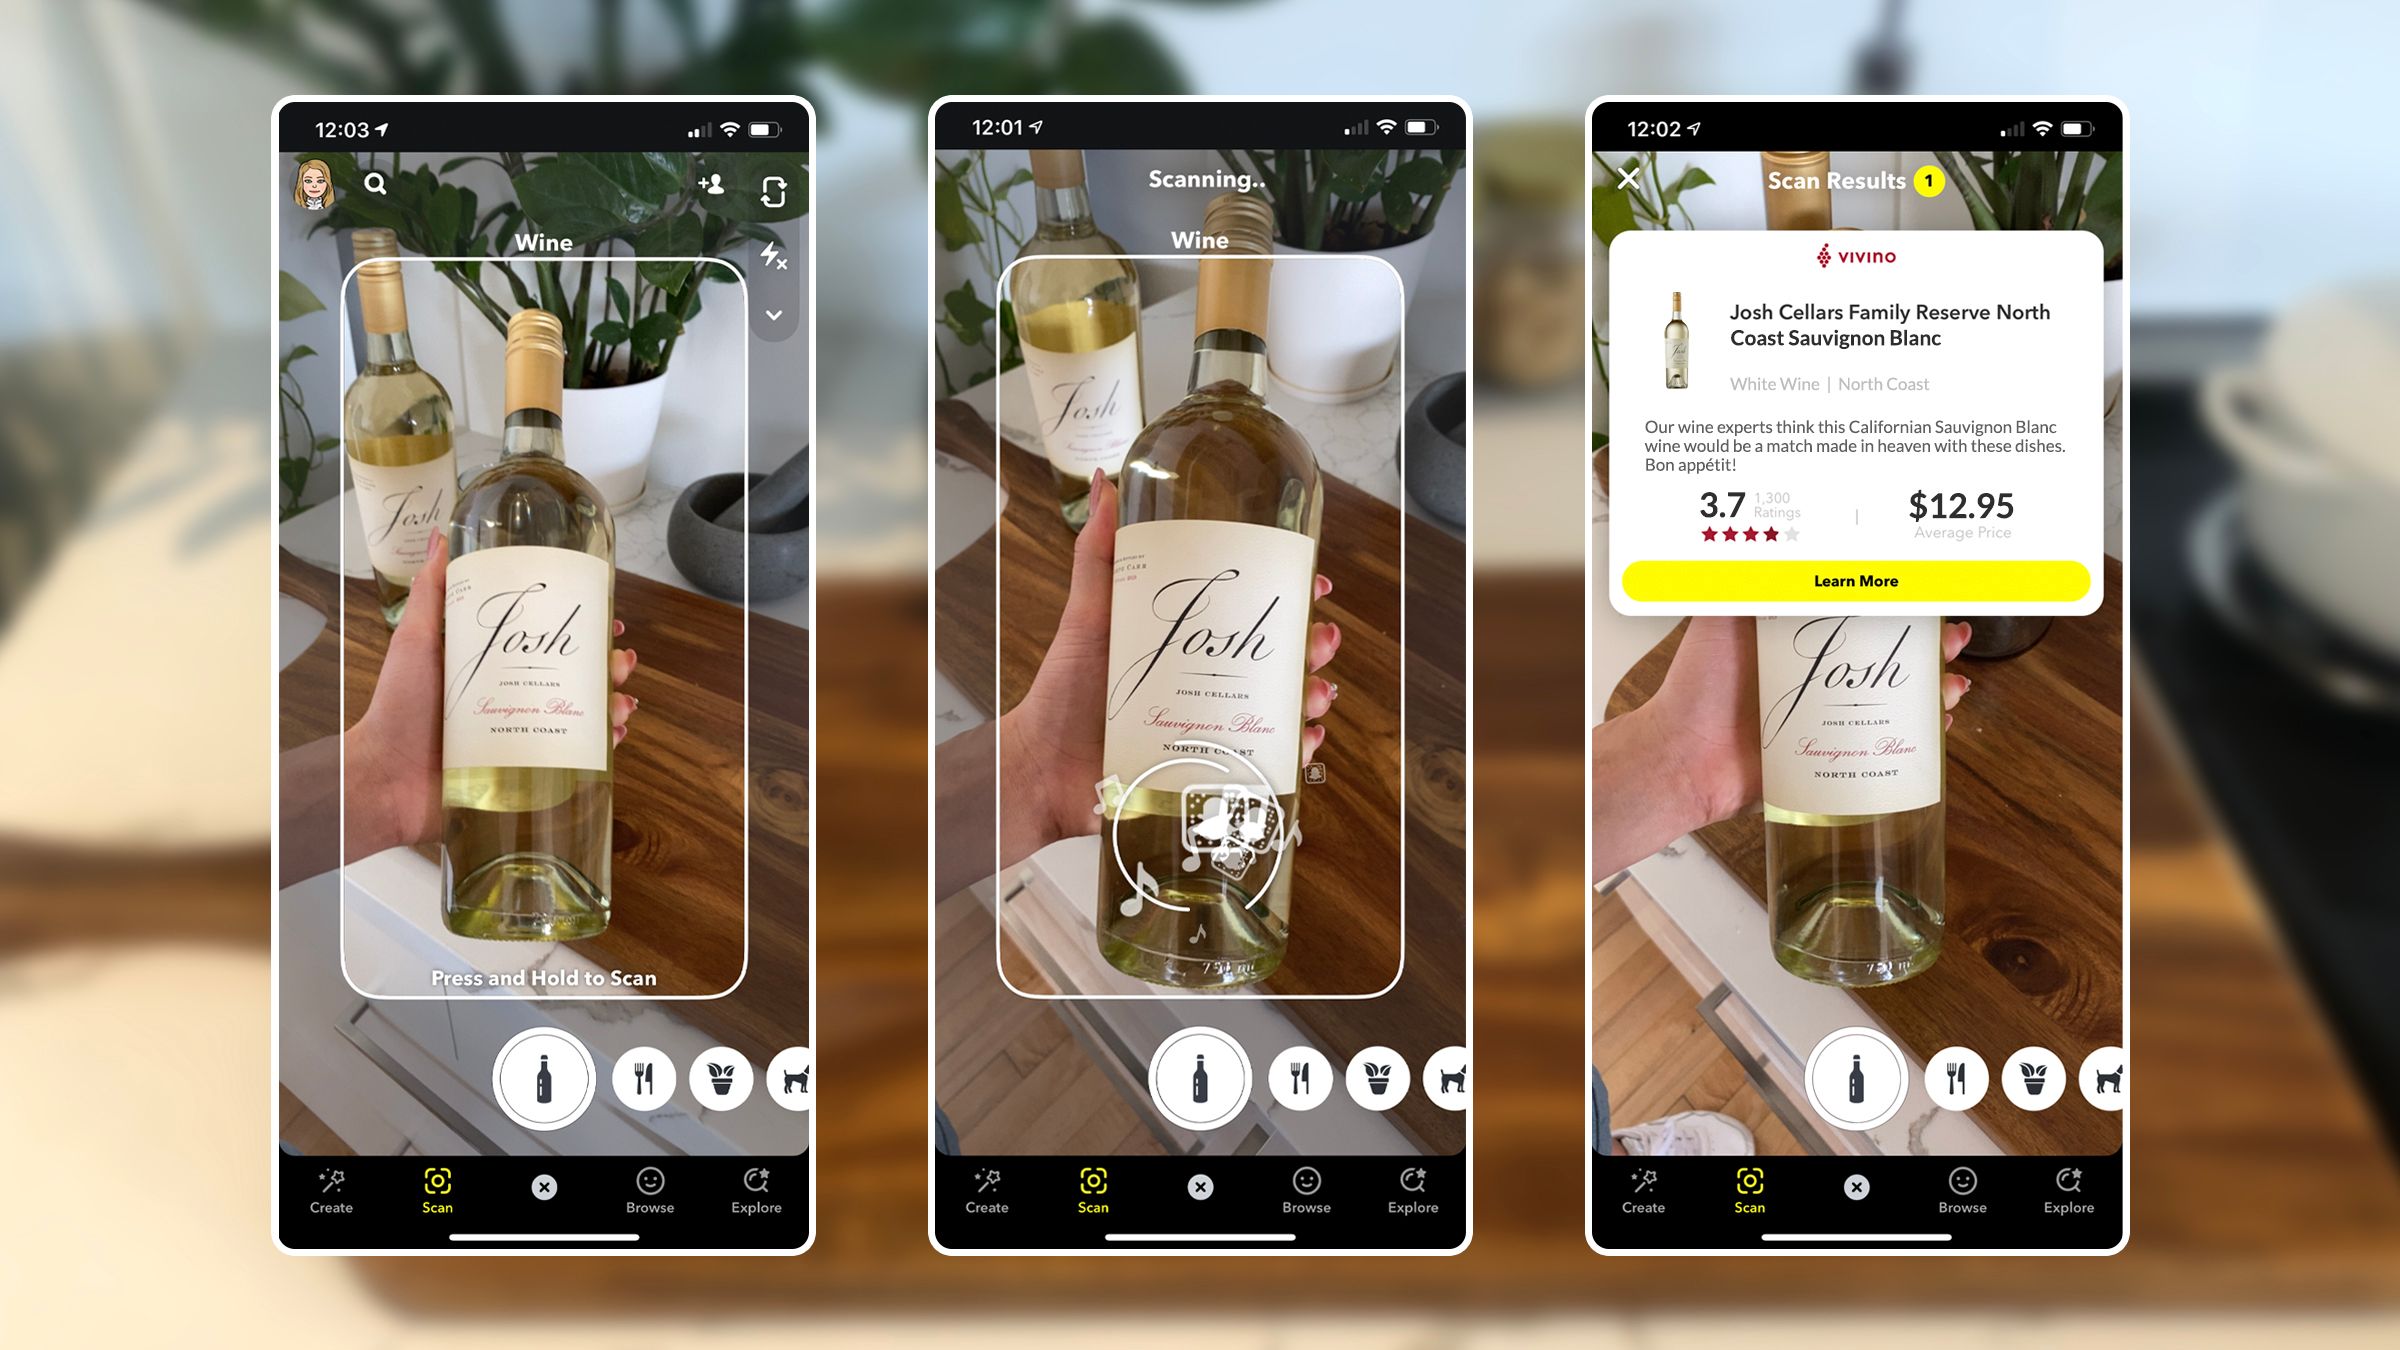 how-to-scan-a-barcode-with-snapchat-for-wine-and-nutrition-info